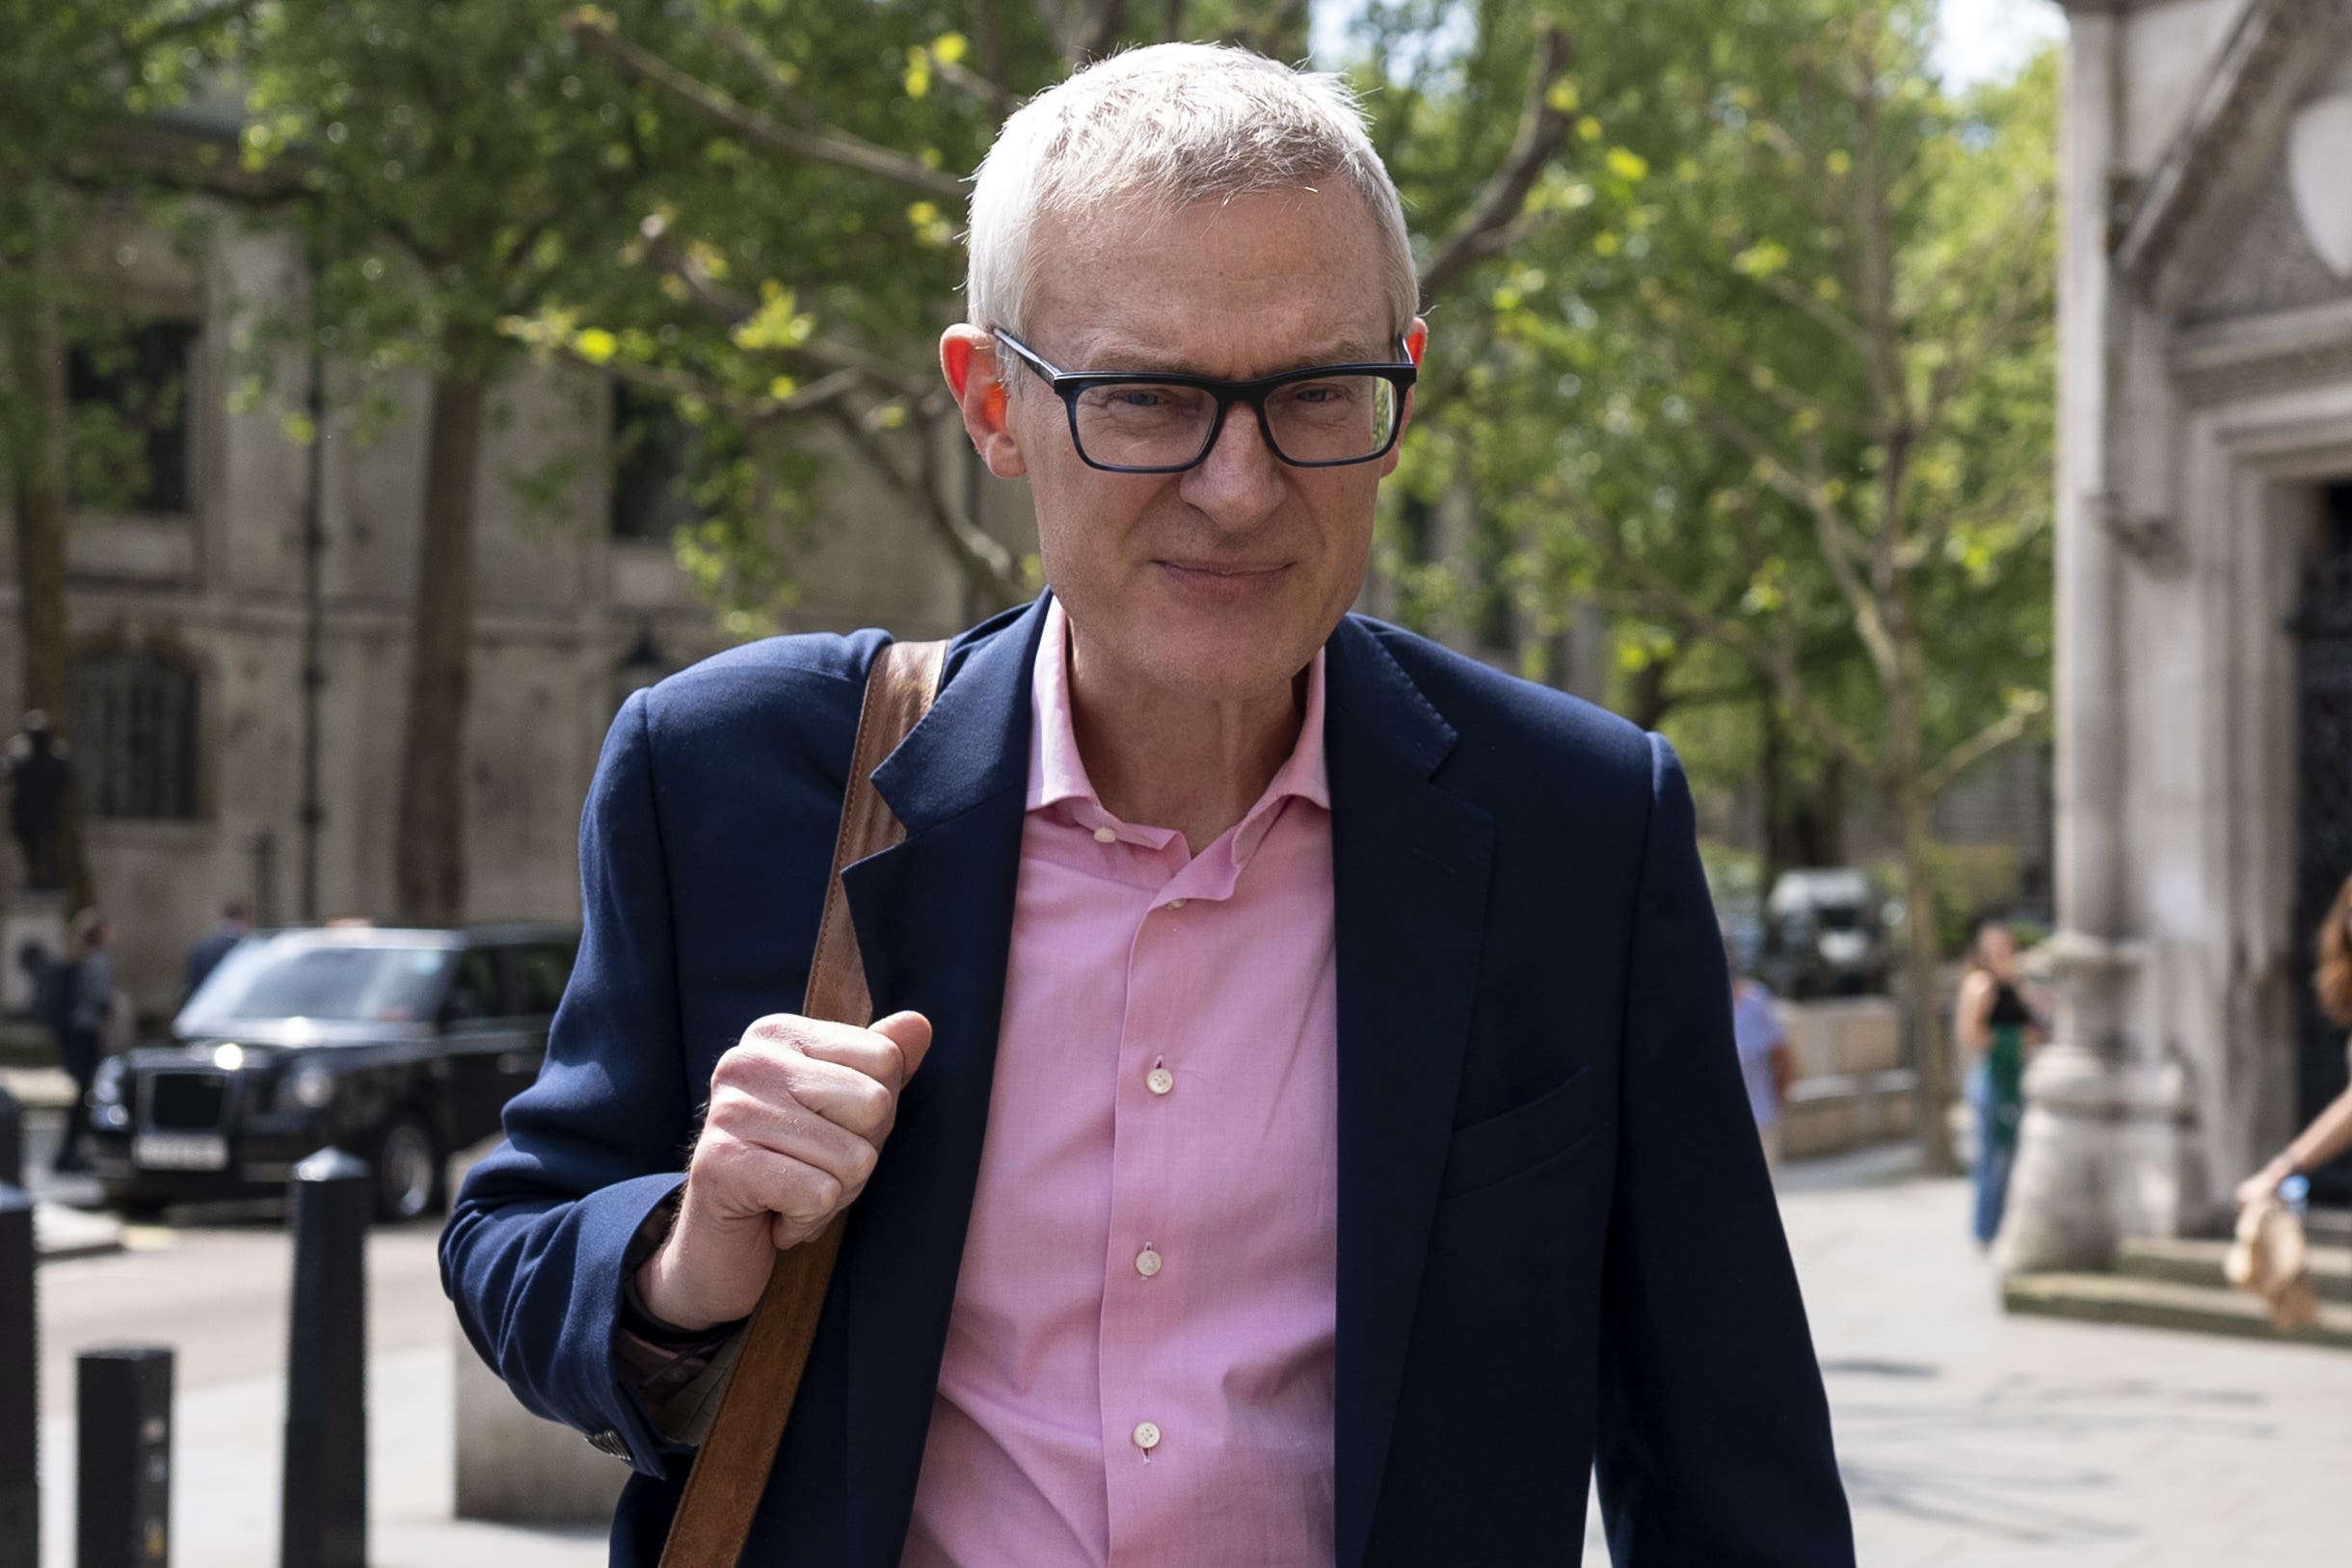 Jeremy Vine arrives at the Royal Courts of Justice in London for the first hearing in the libel claim brought by himself against Joey Barton